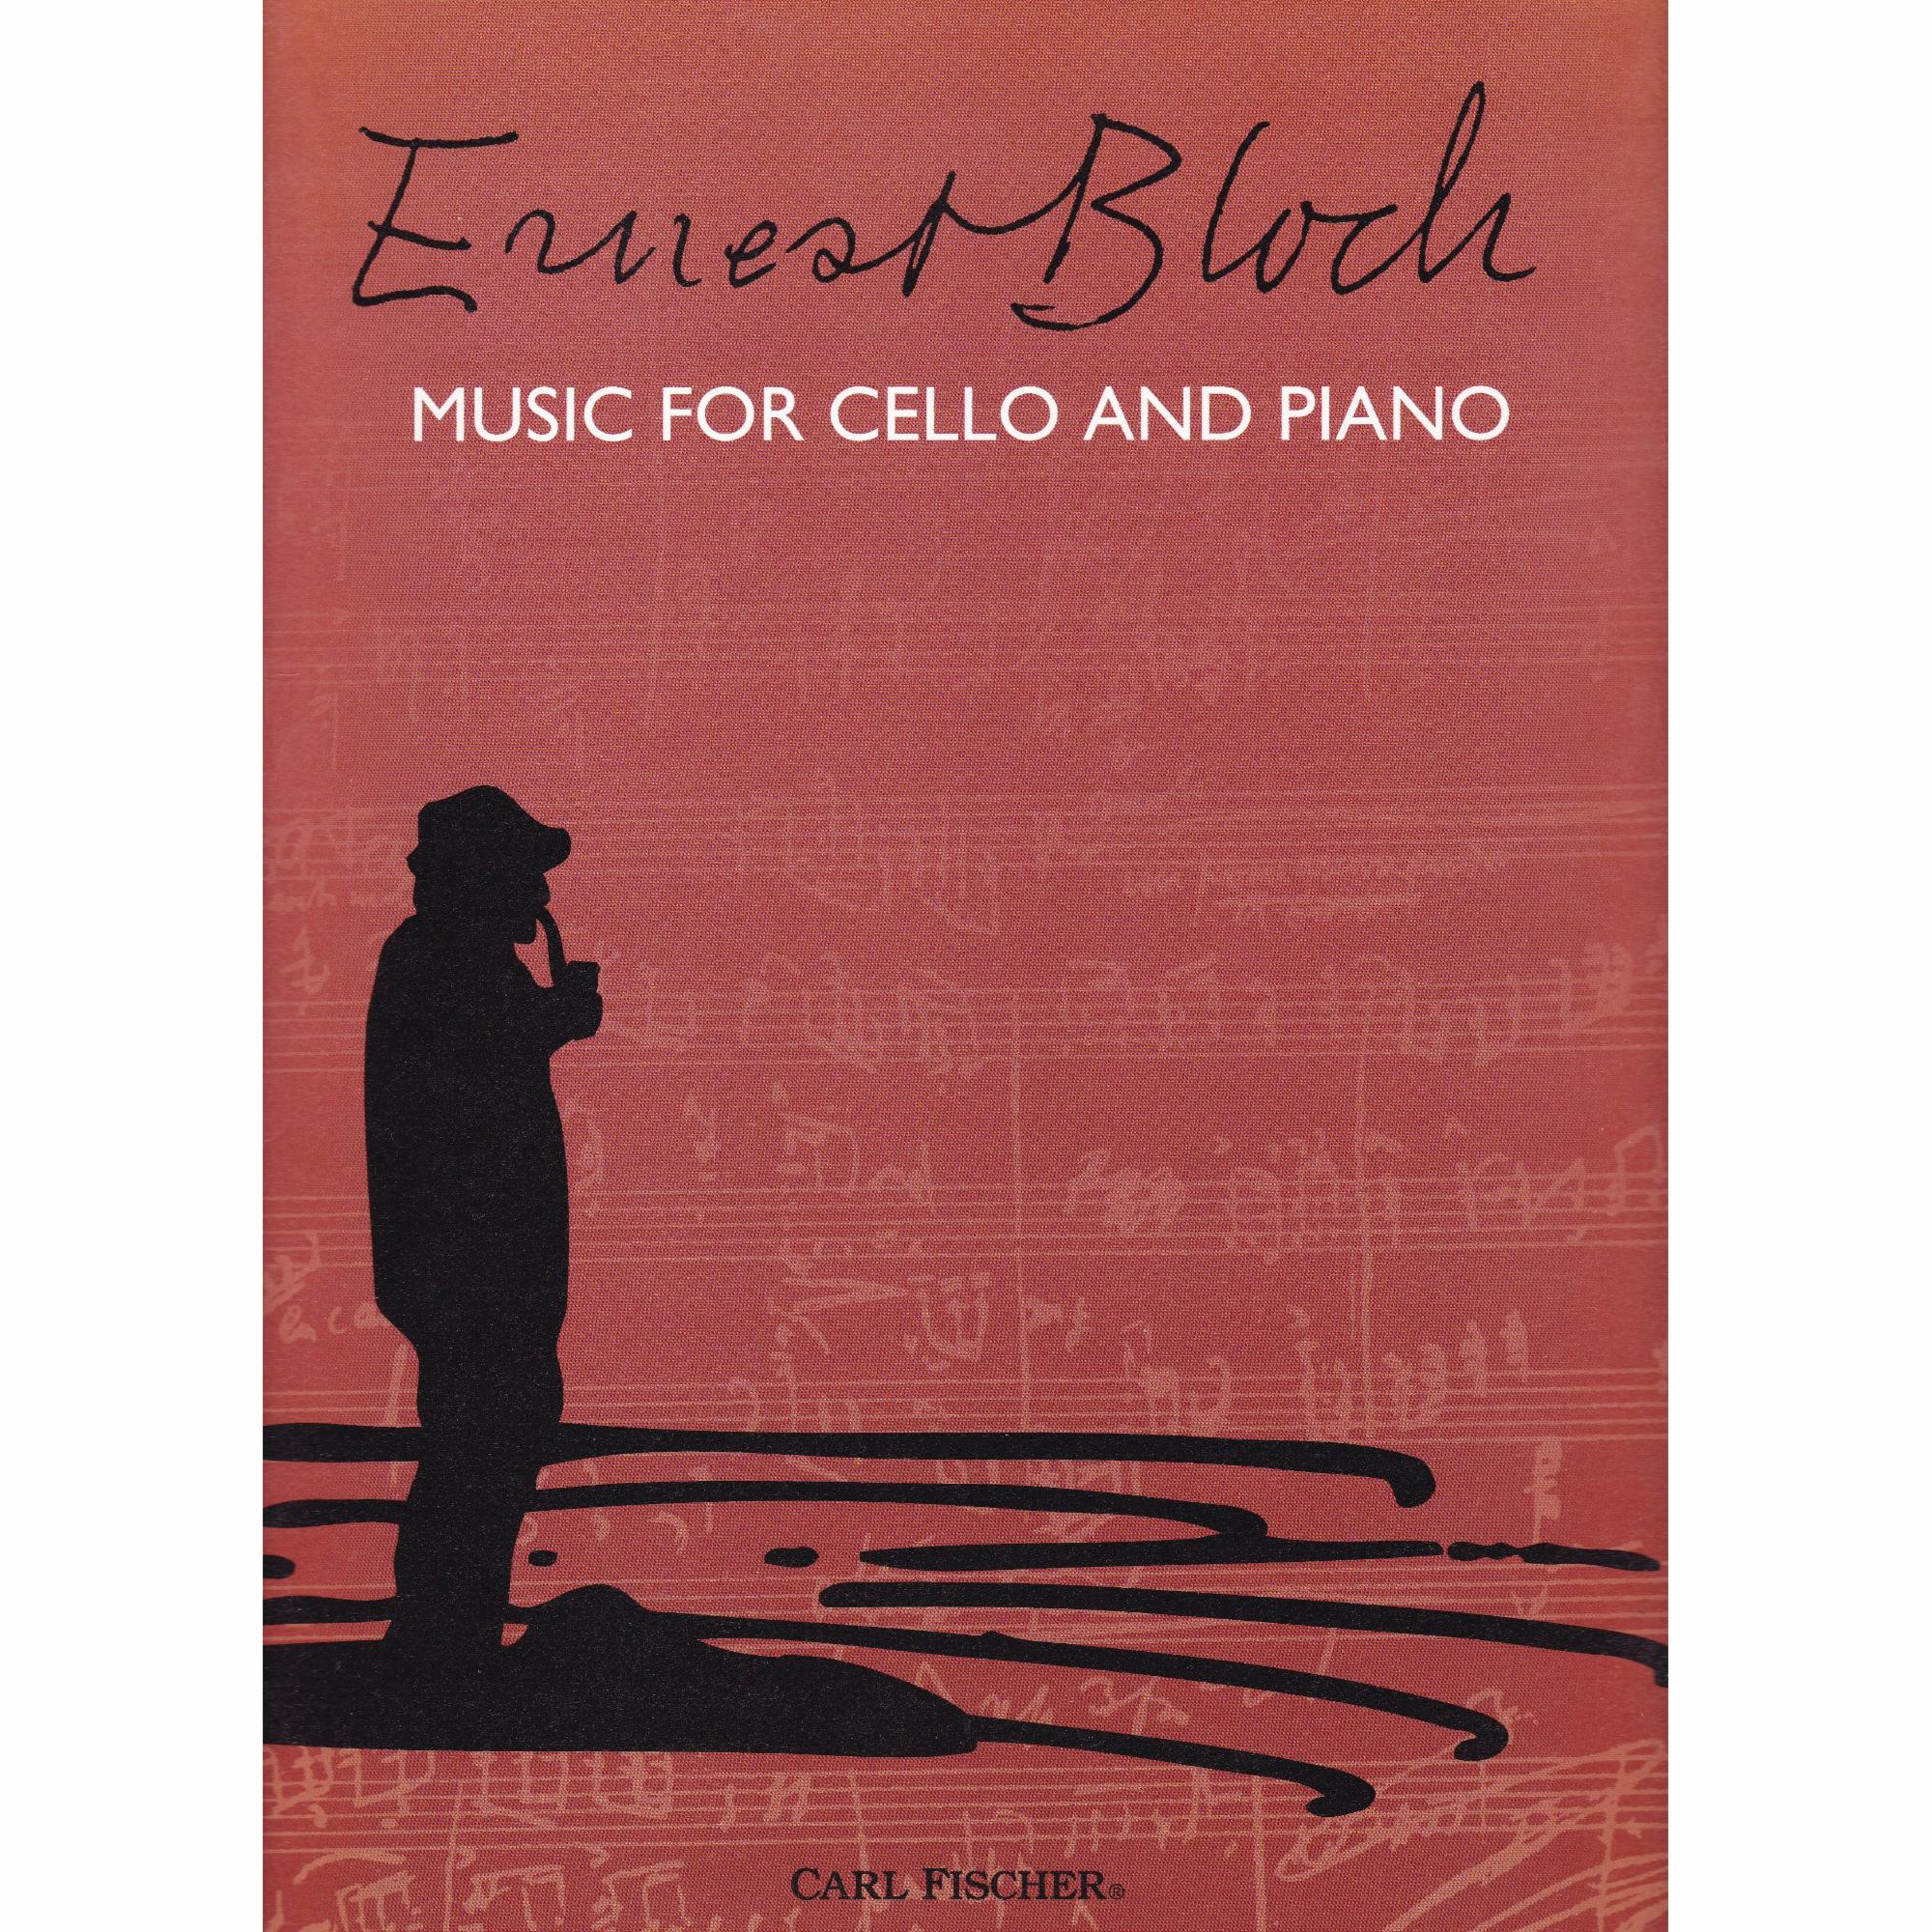 Music for Cello and Piano